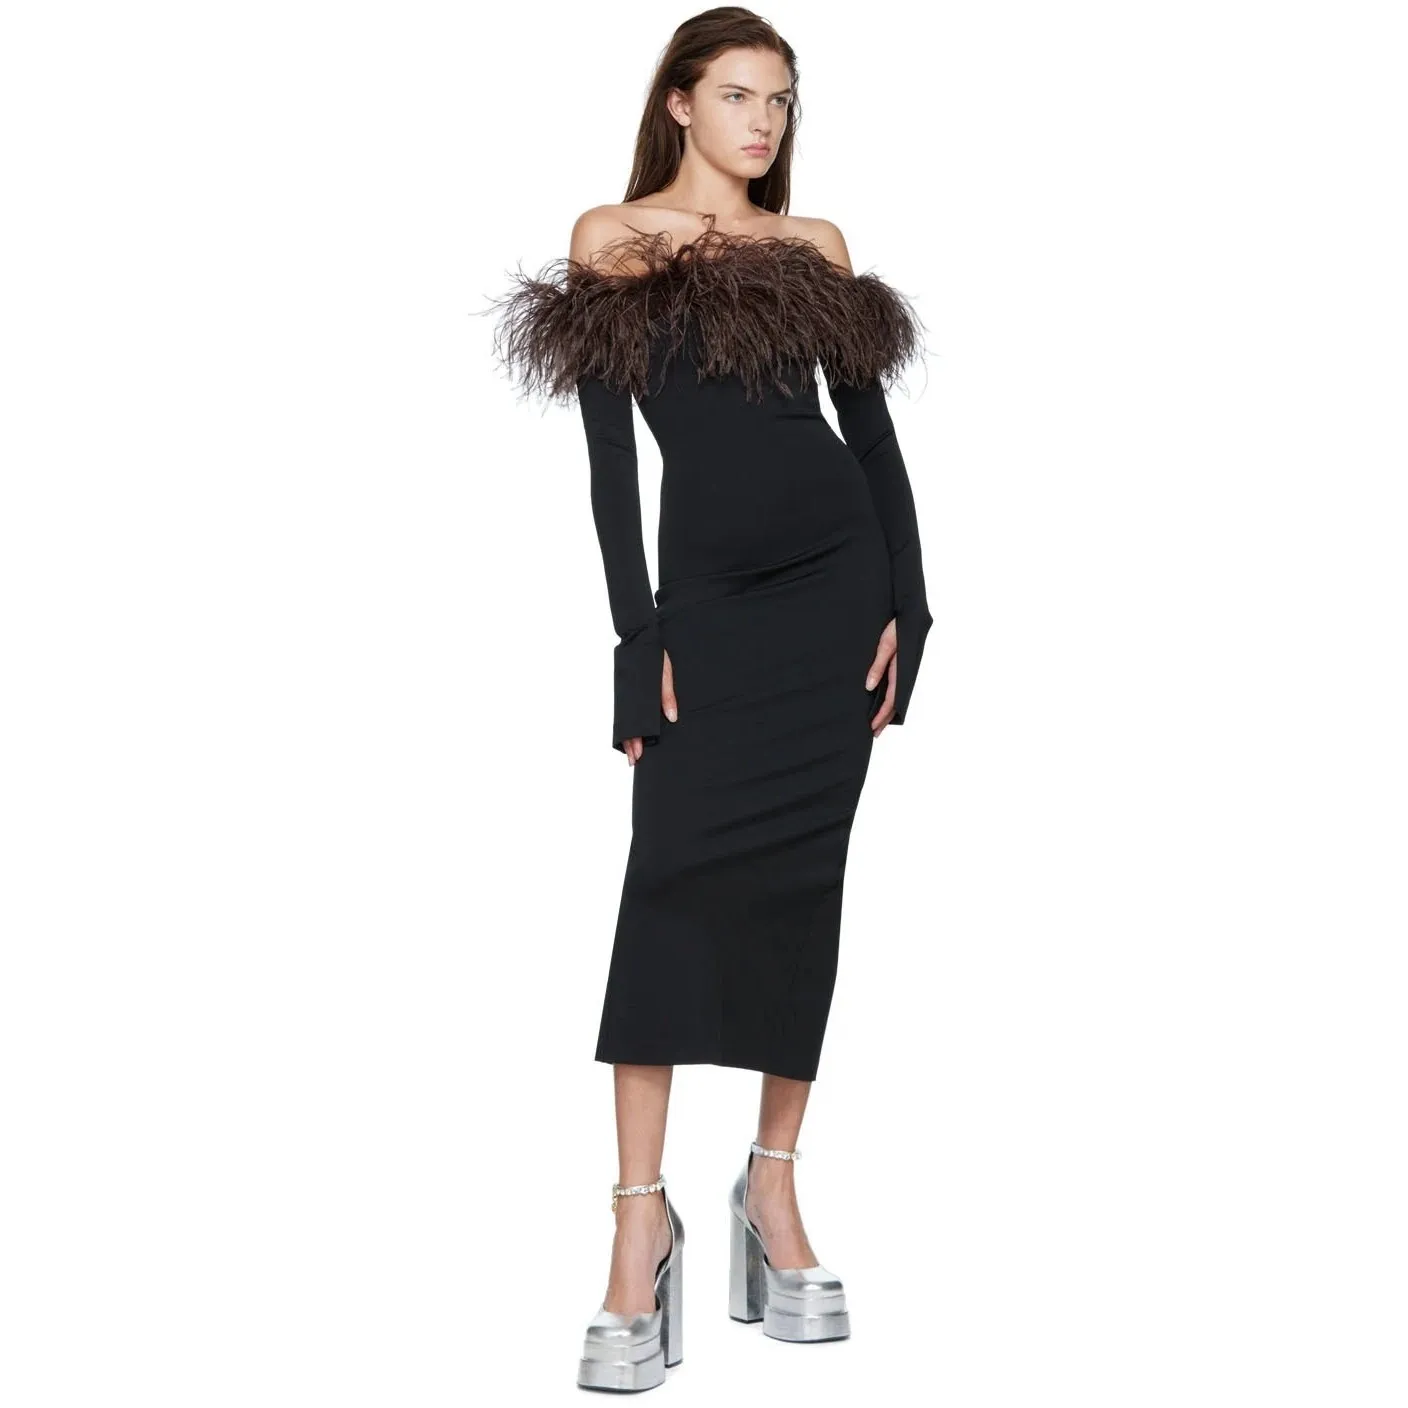 

Black Sexy Woman Dress Strapless Ostrich Feather French Retro Elegant Long Sleeve Tea-Length Off-the-shoulder Party Party Gowns